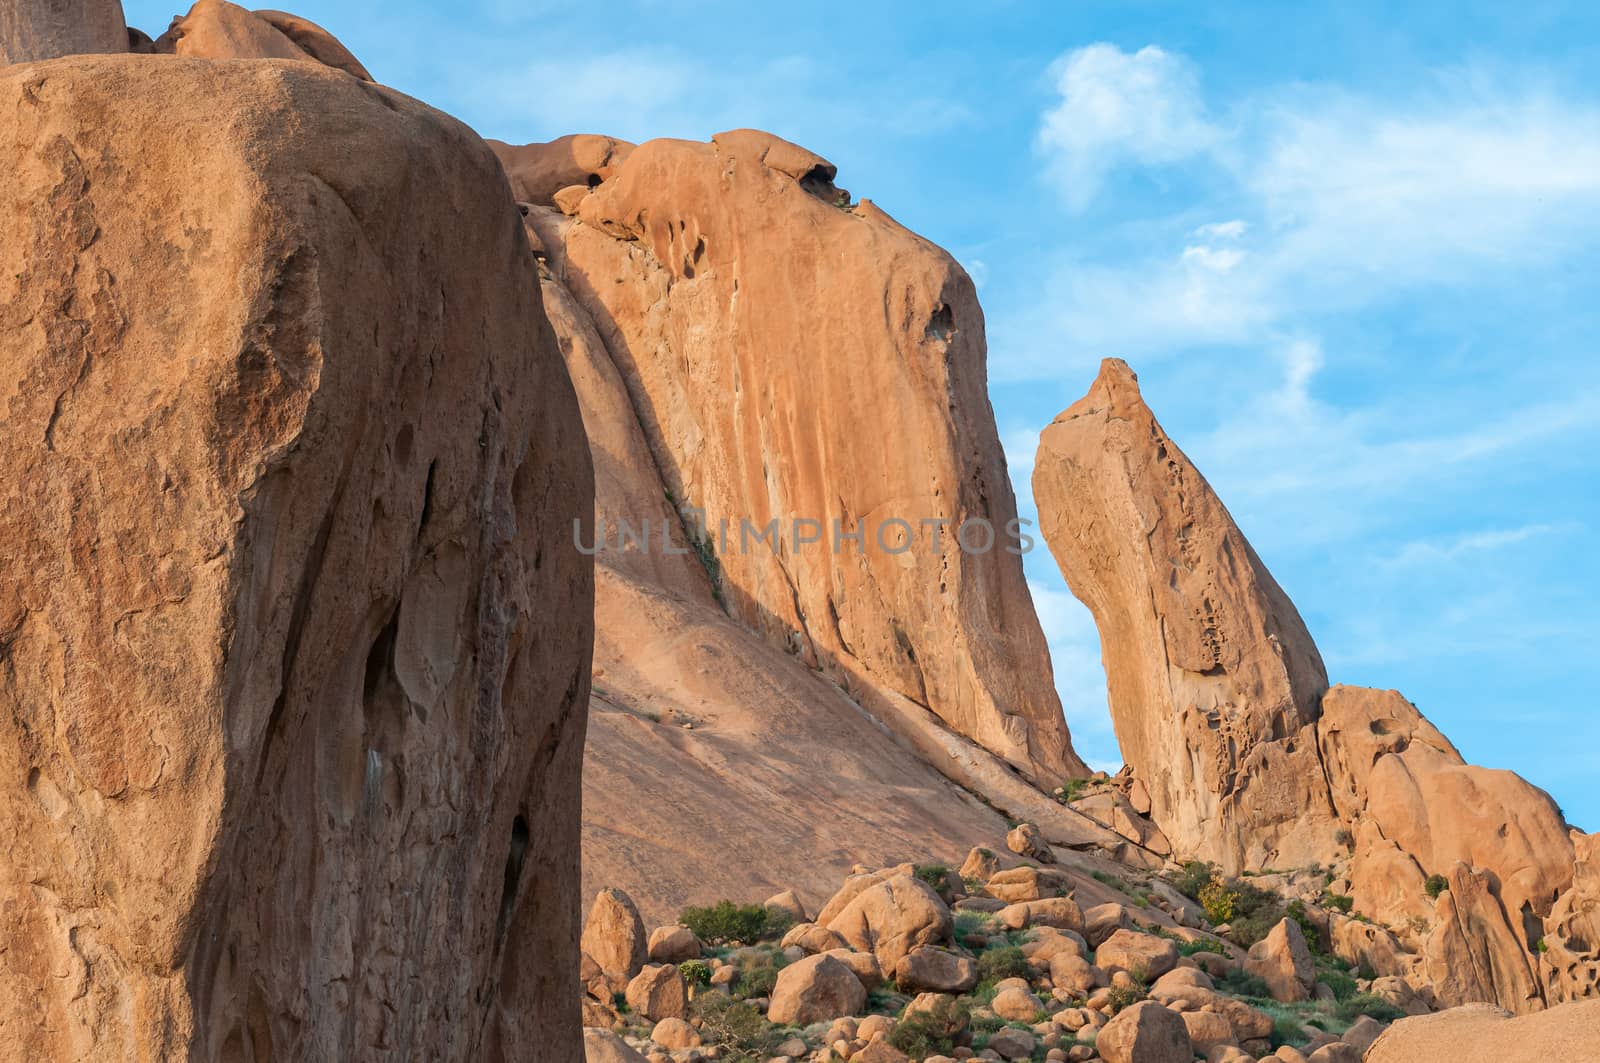 A granite needle and rock formation resembling a baboon face at the greater Spitzkoppe